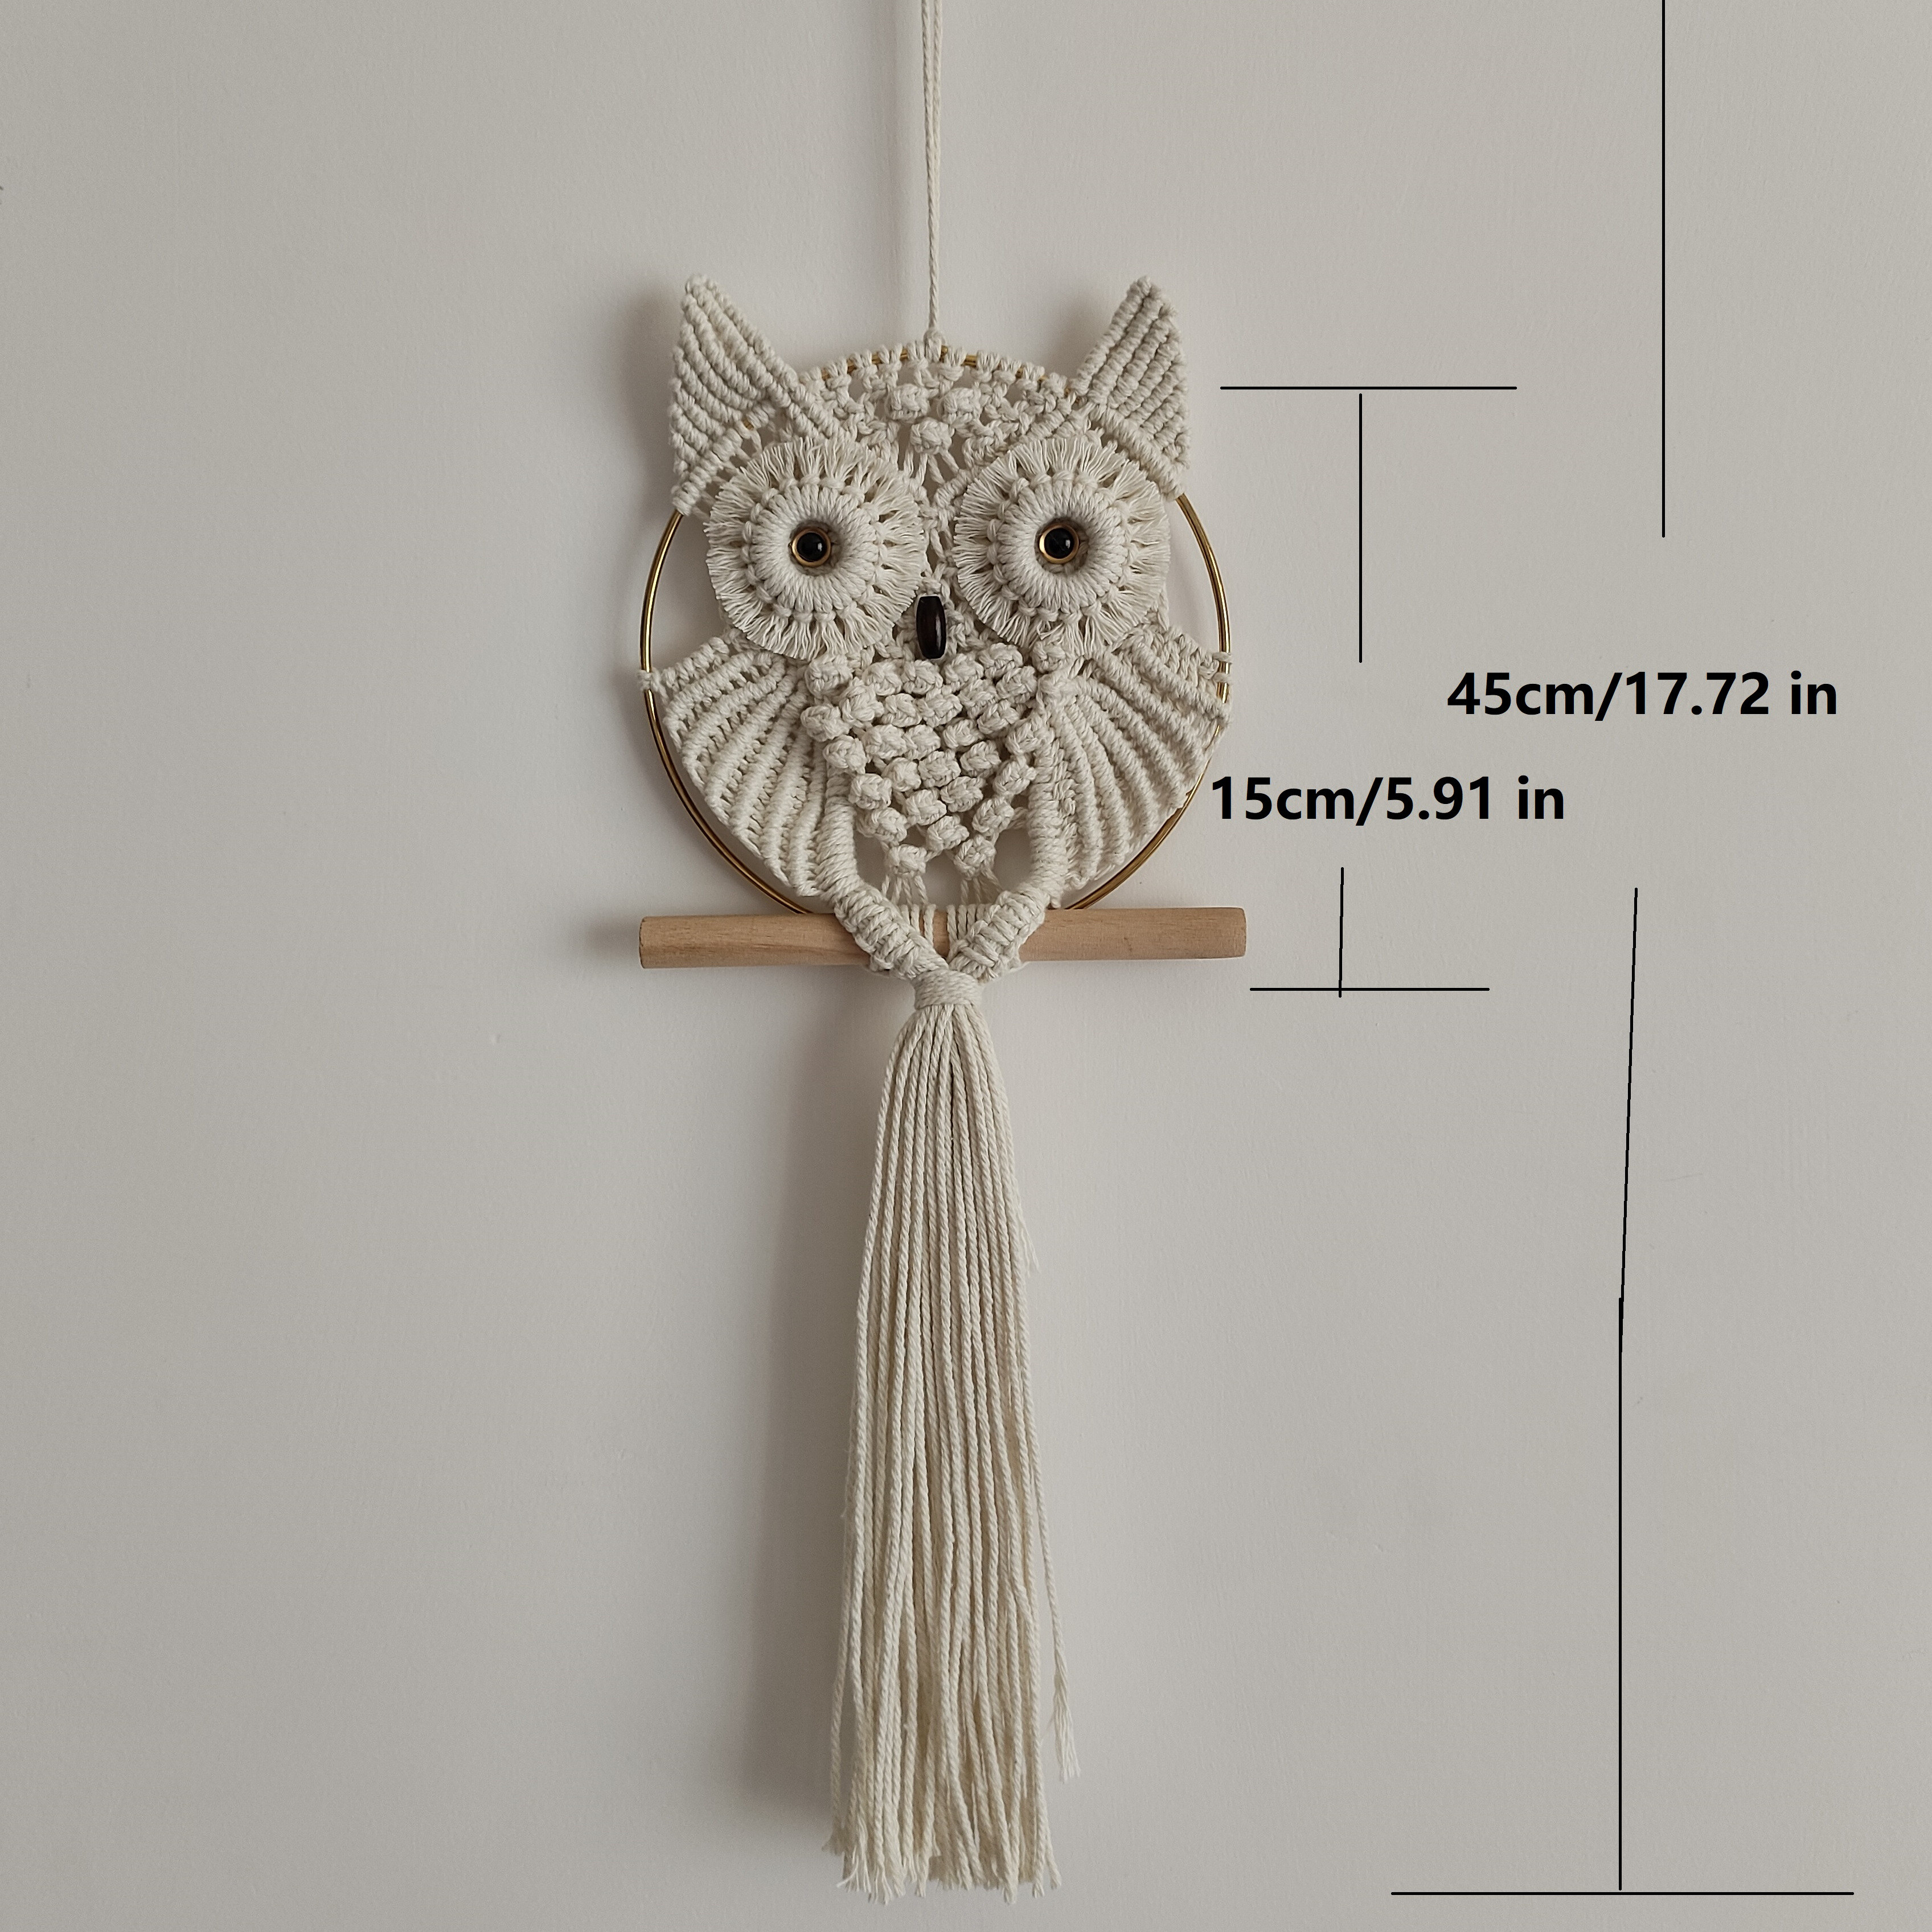  Macrame Kits for Adults Beginners, 2 in 1 Circle+Owl